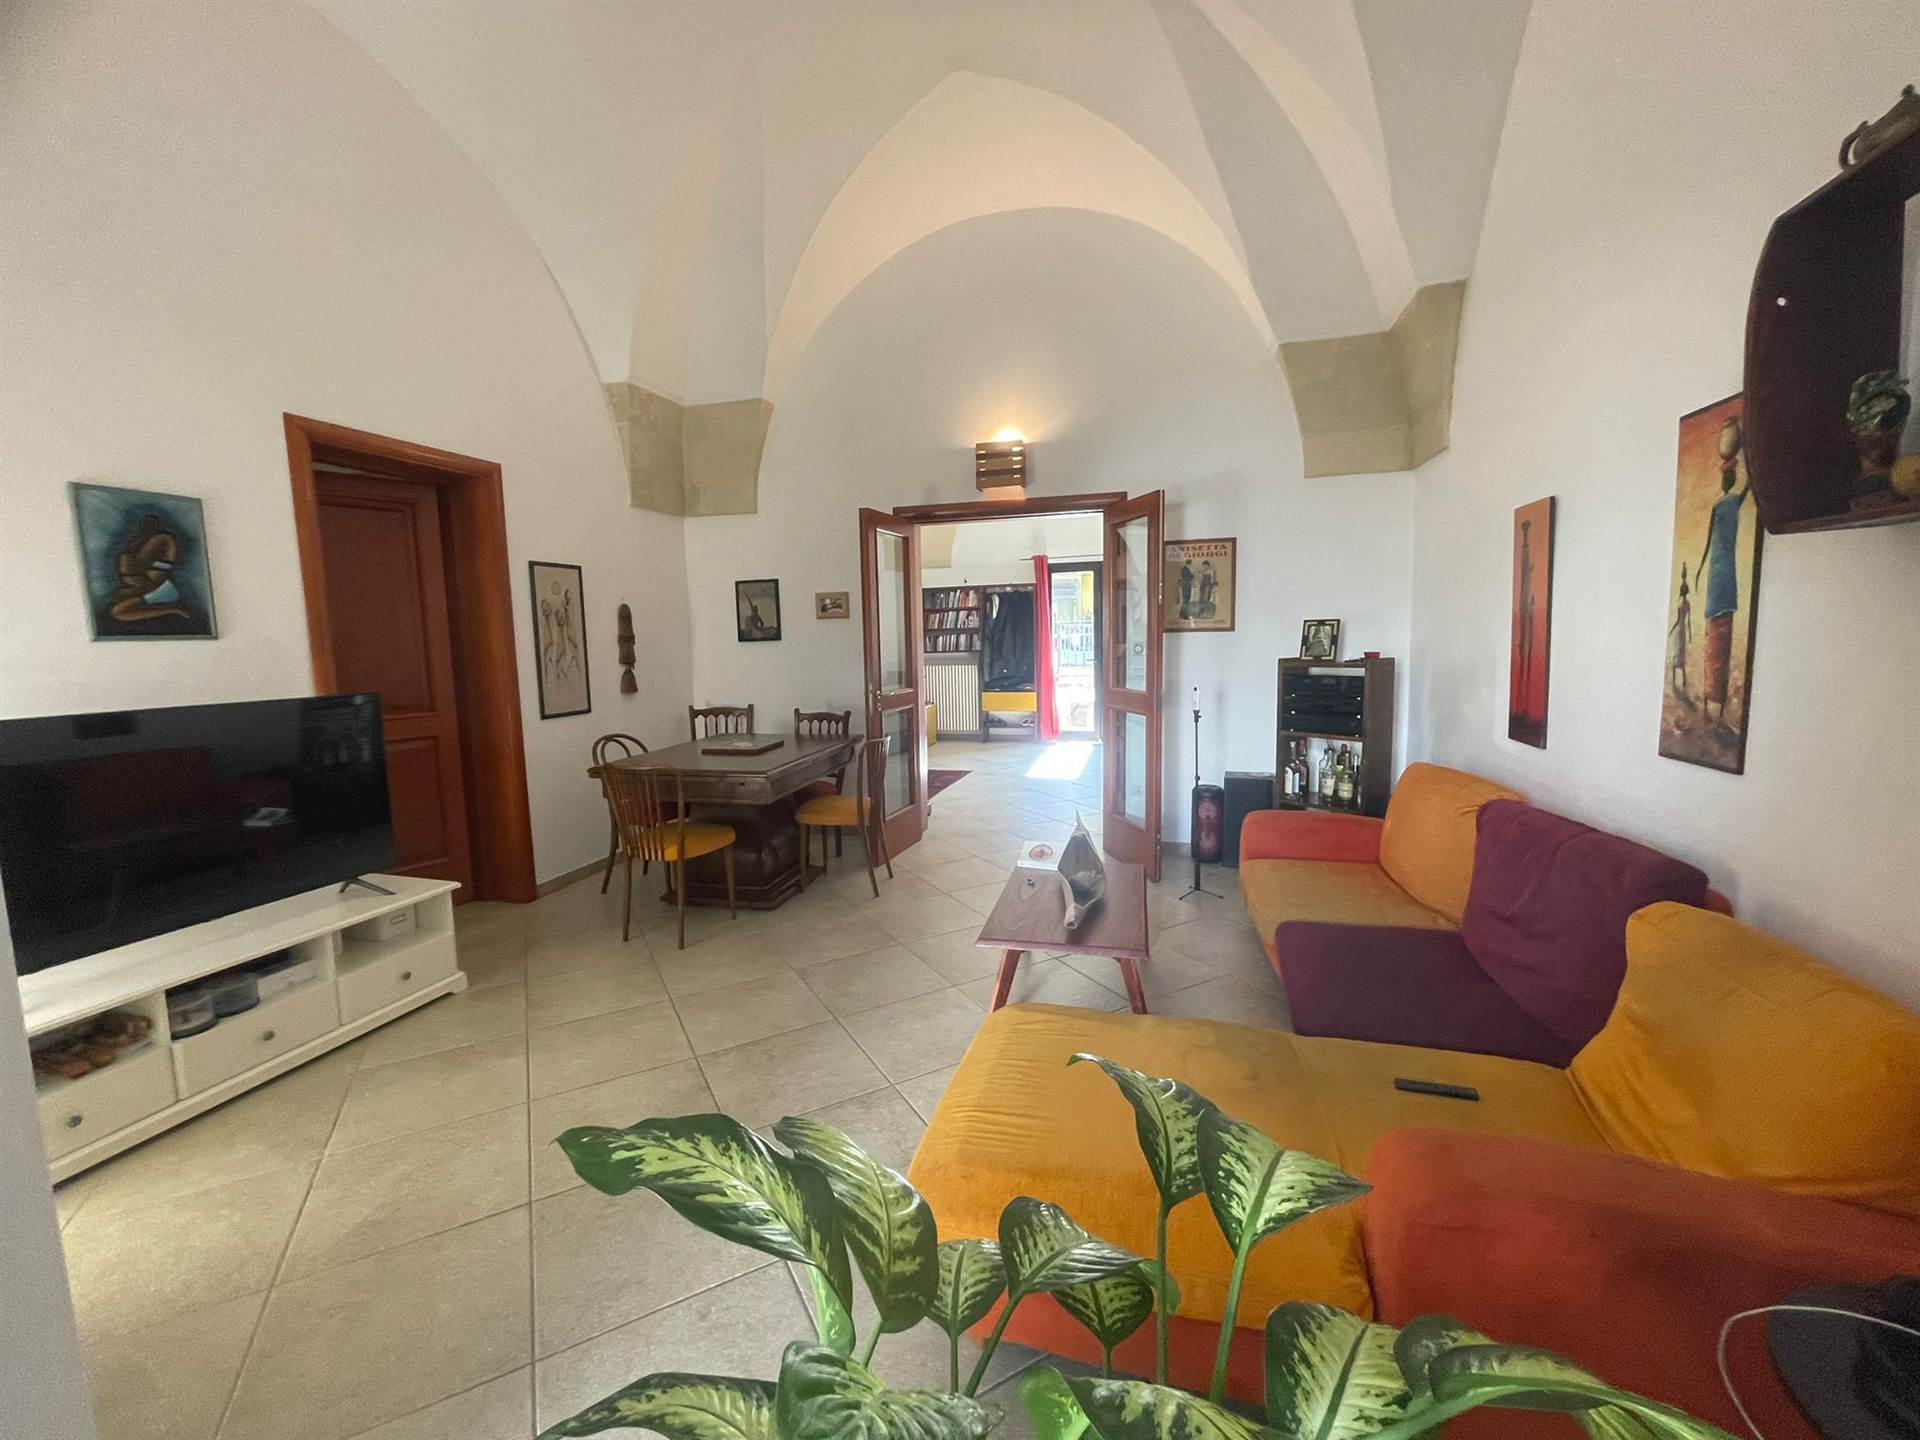 SAN CESARIO DI LECCE, Detached apartment for sale of 120 Sq. mt., Excellent Condition, Heating Individual heating system, Energetic class: E, Epi: 